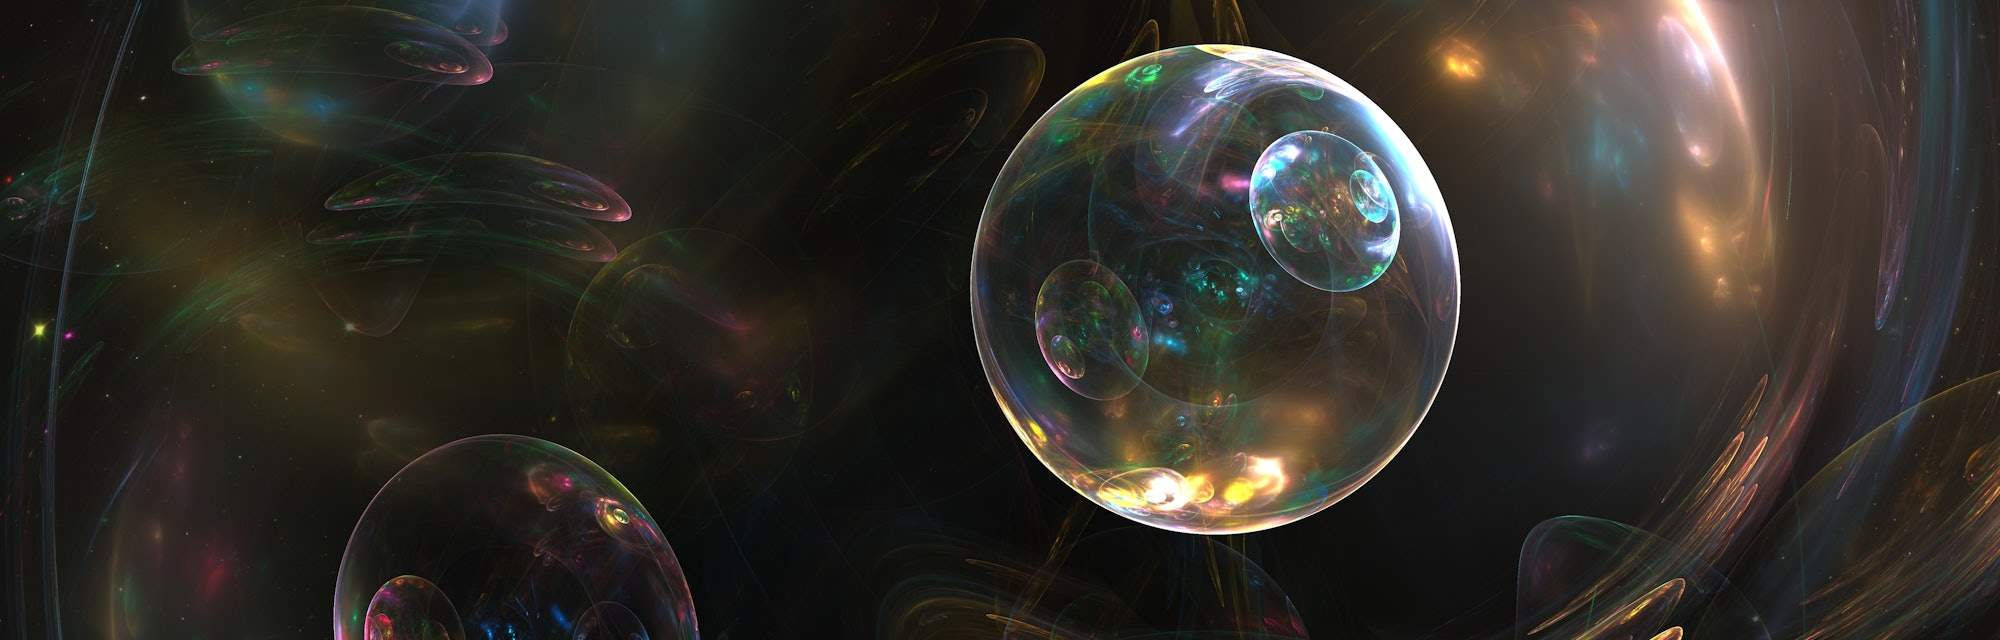 Fractal image with soap bubbles or colorful space background. Quantum physics. Glass balls or photon...